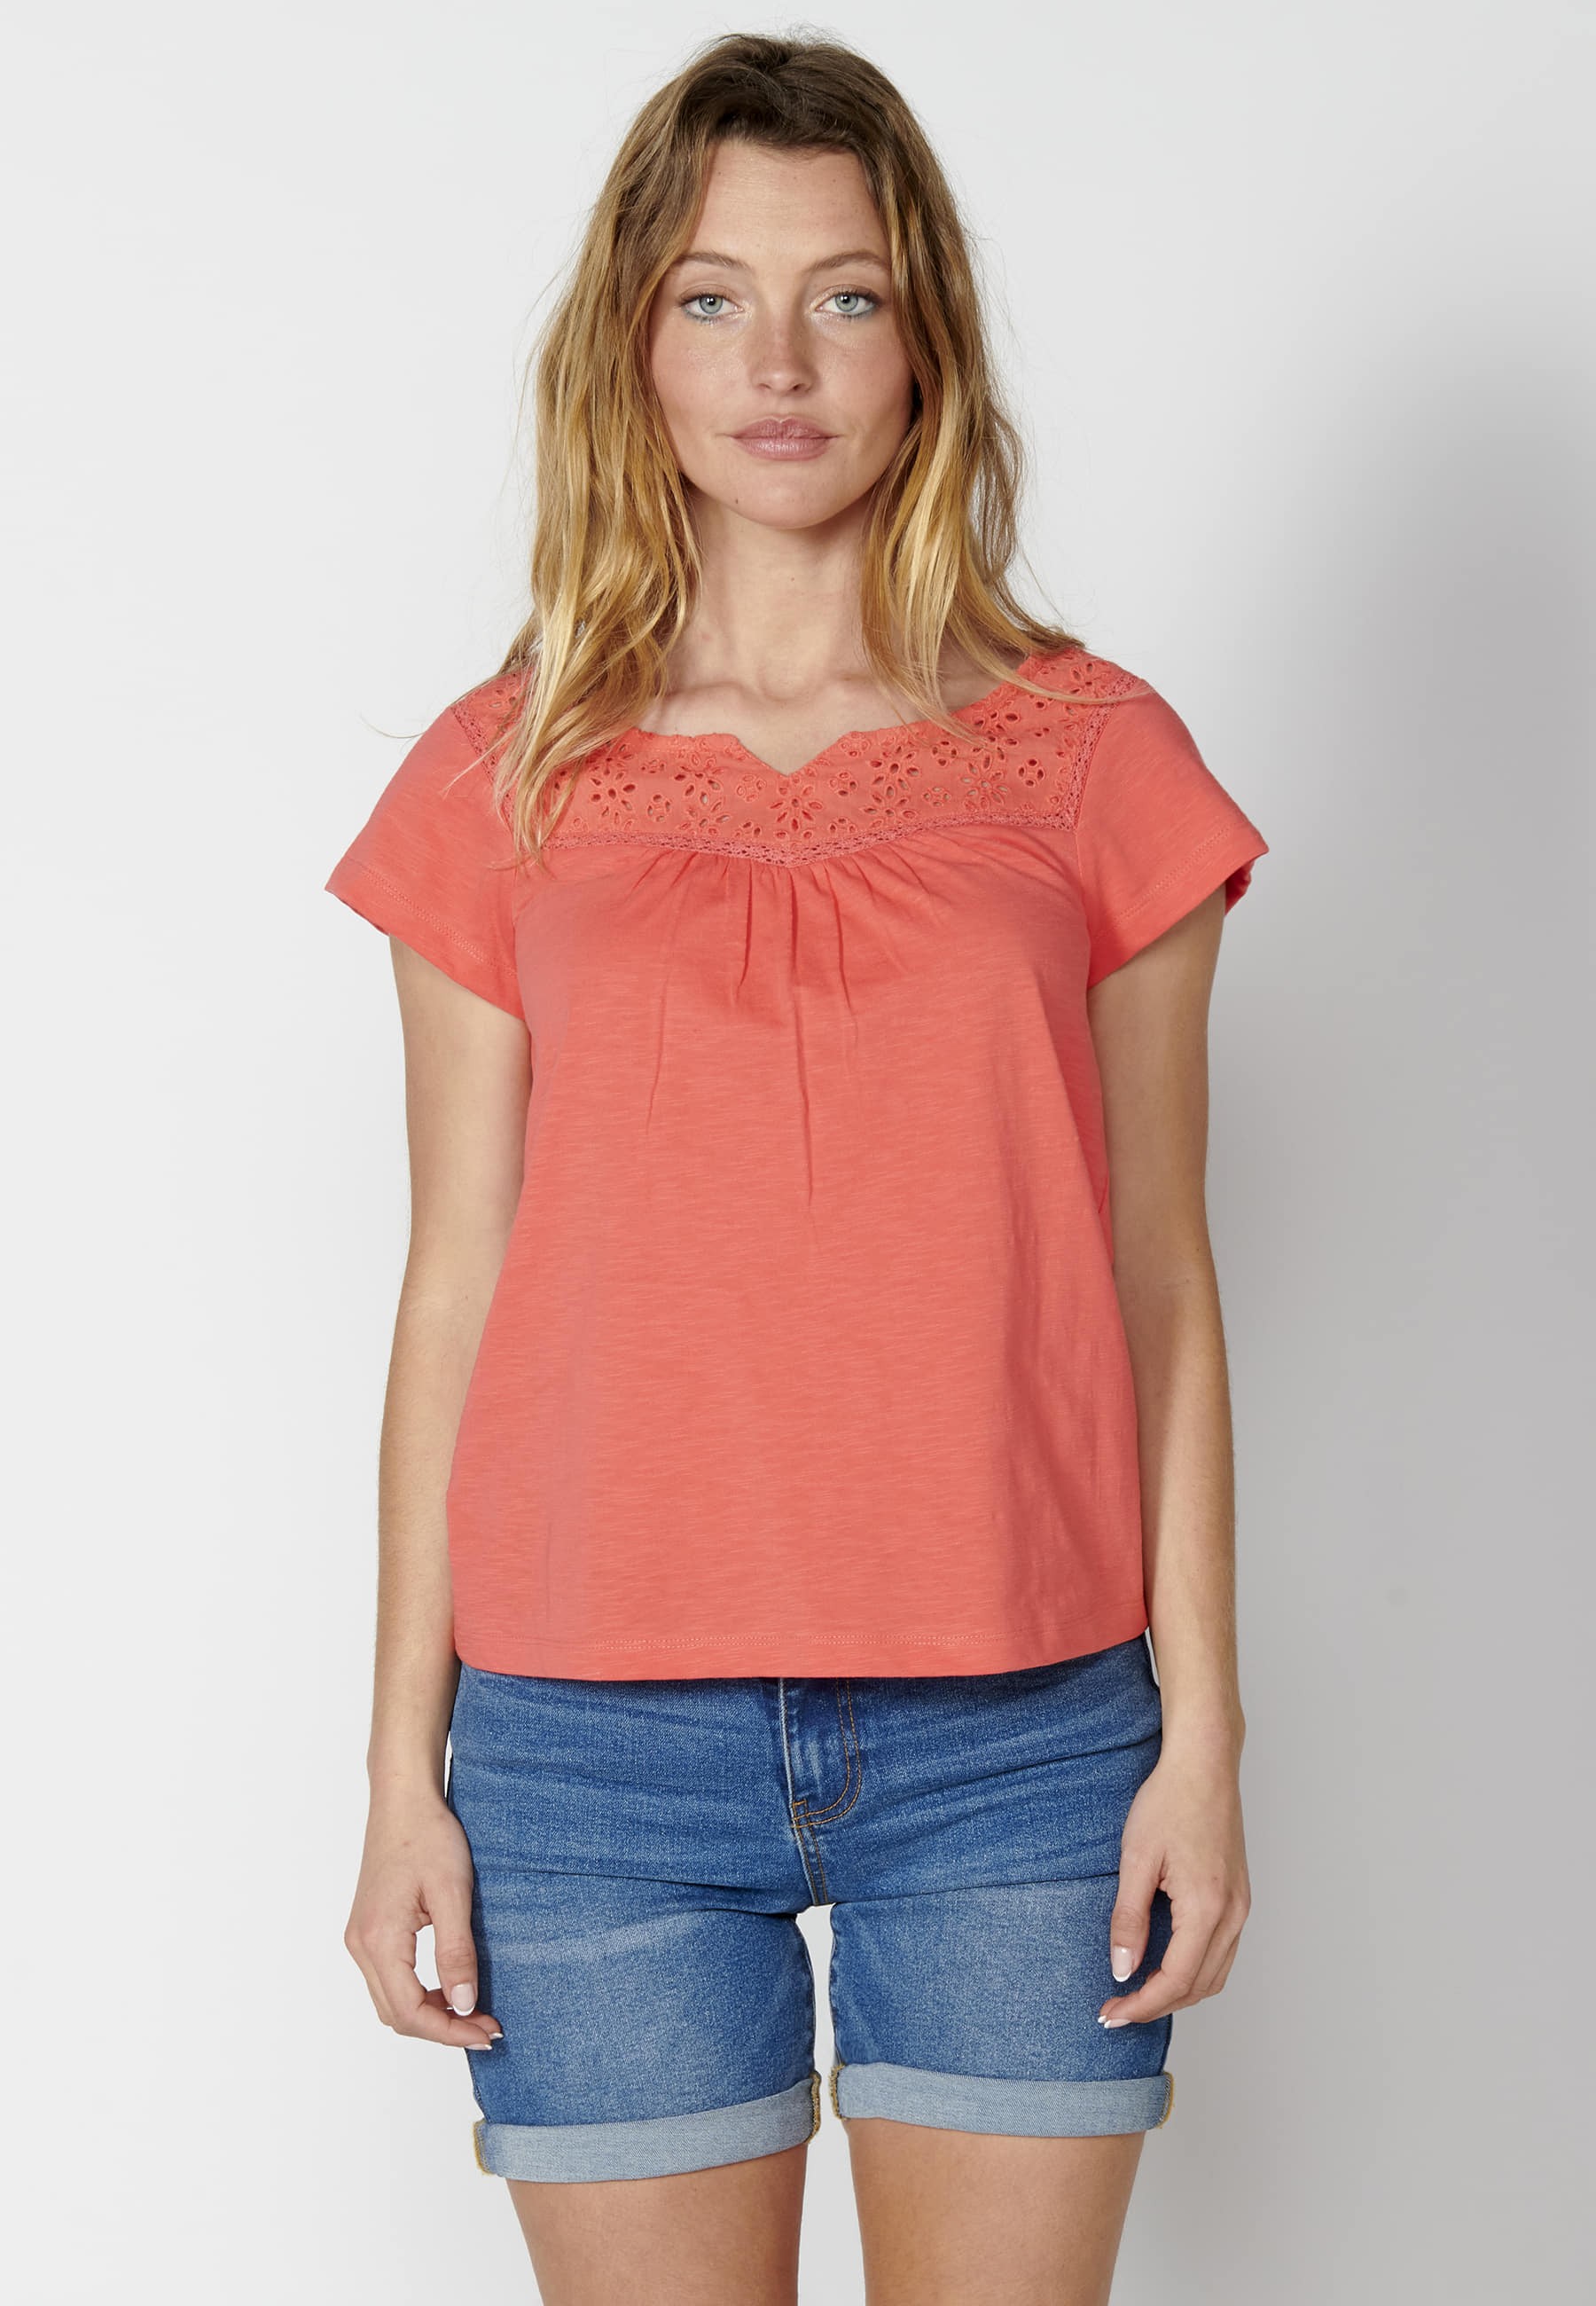 Short-sleeved Cotton T-shirt with a sweetheart neckline in Coral color for Women